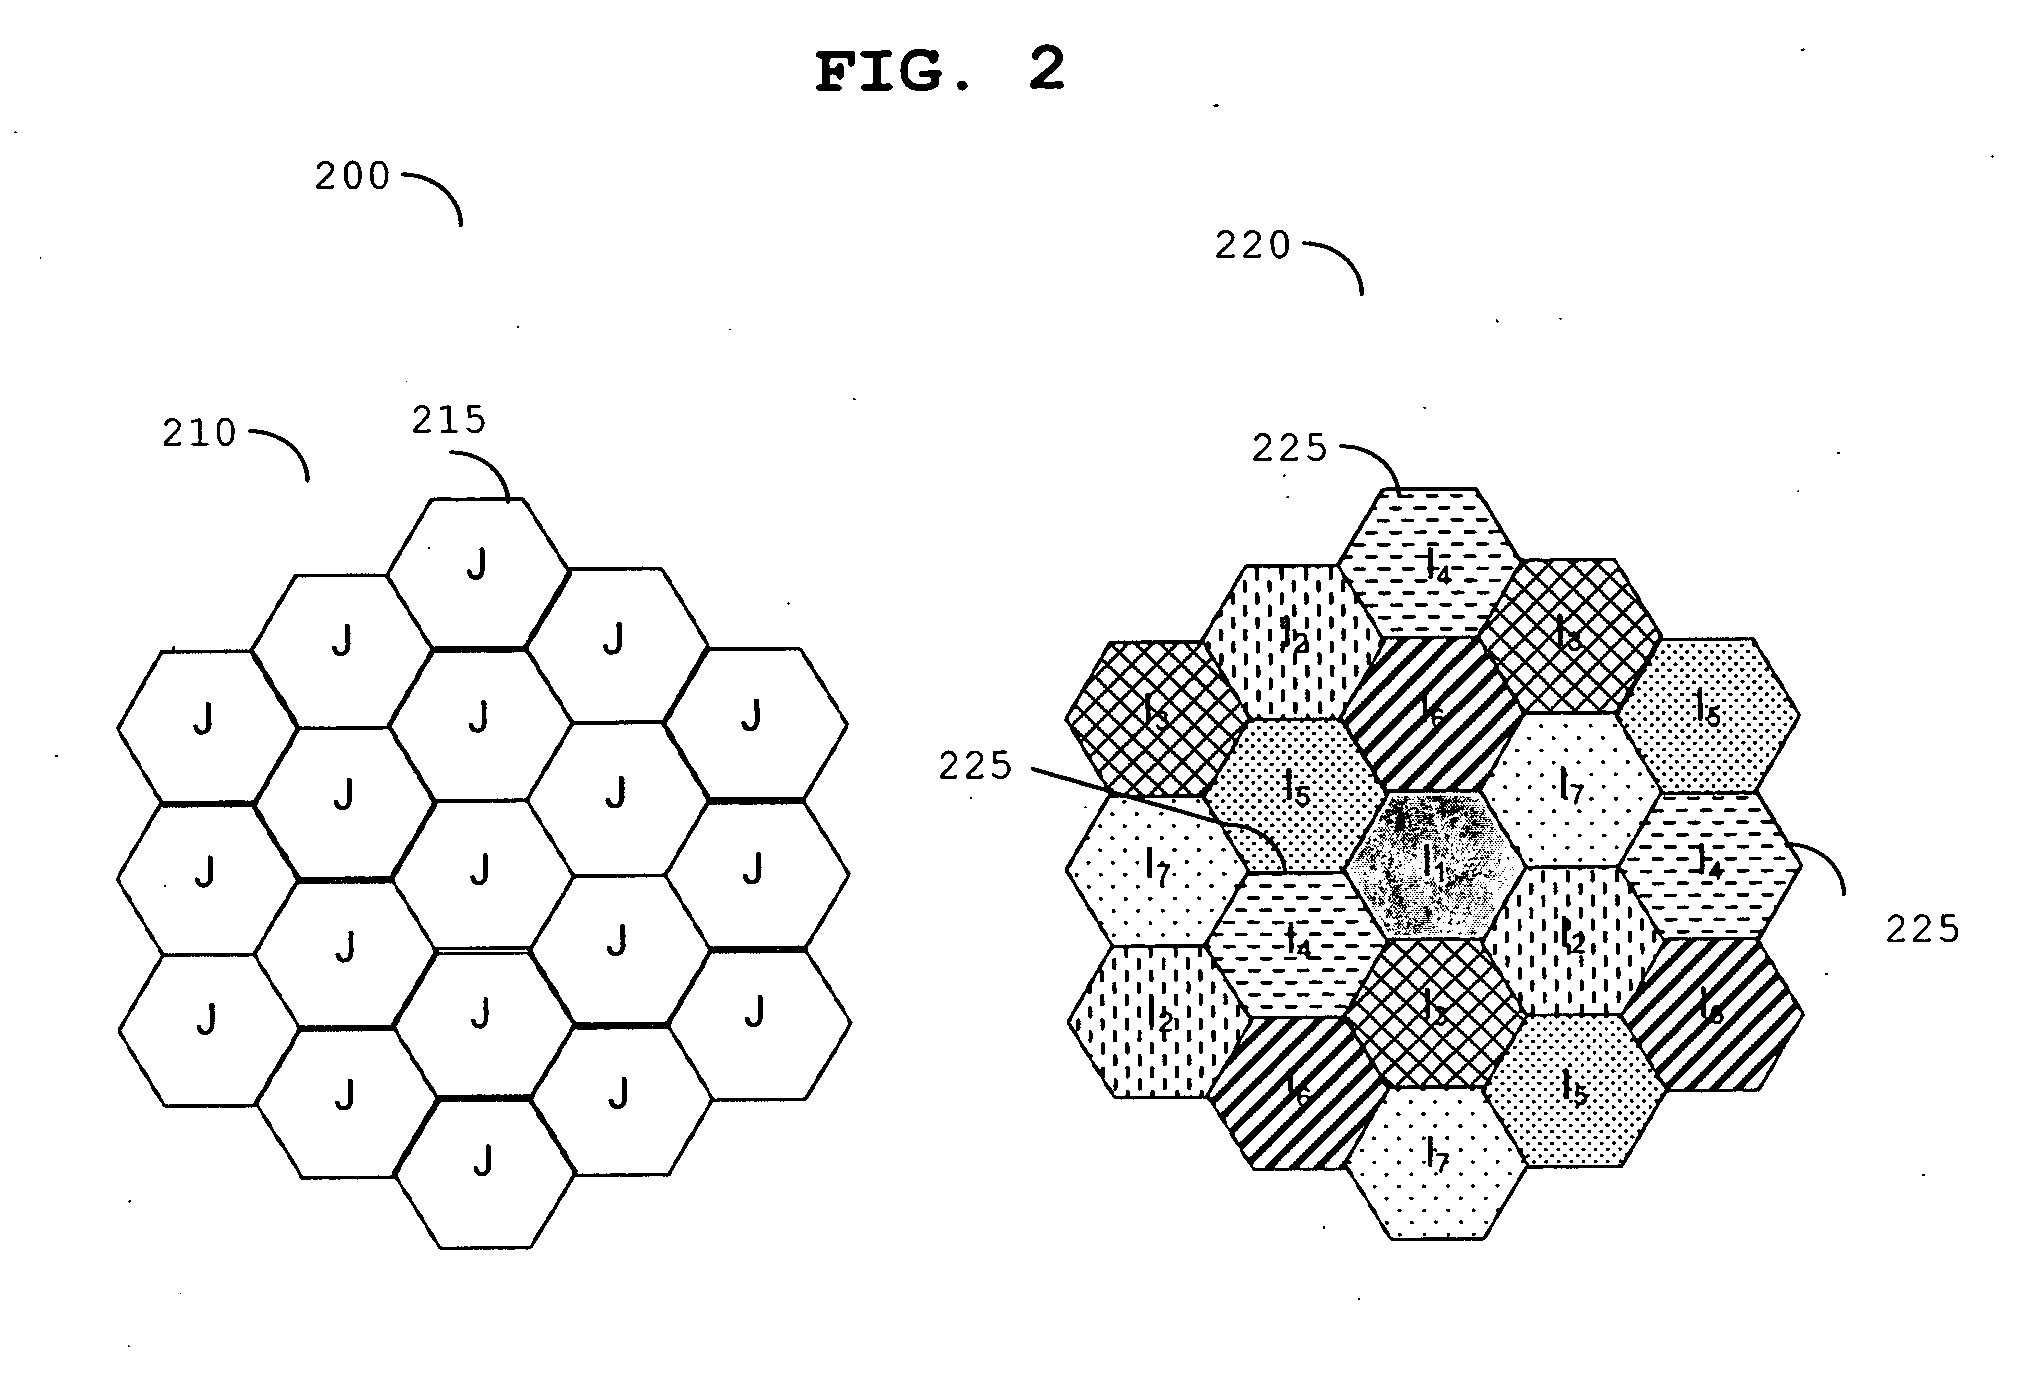 Cellular communication system and method for broadcast communication